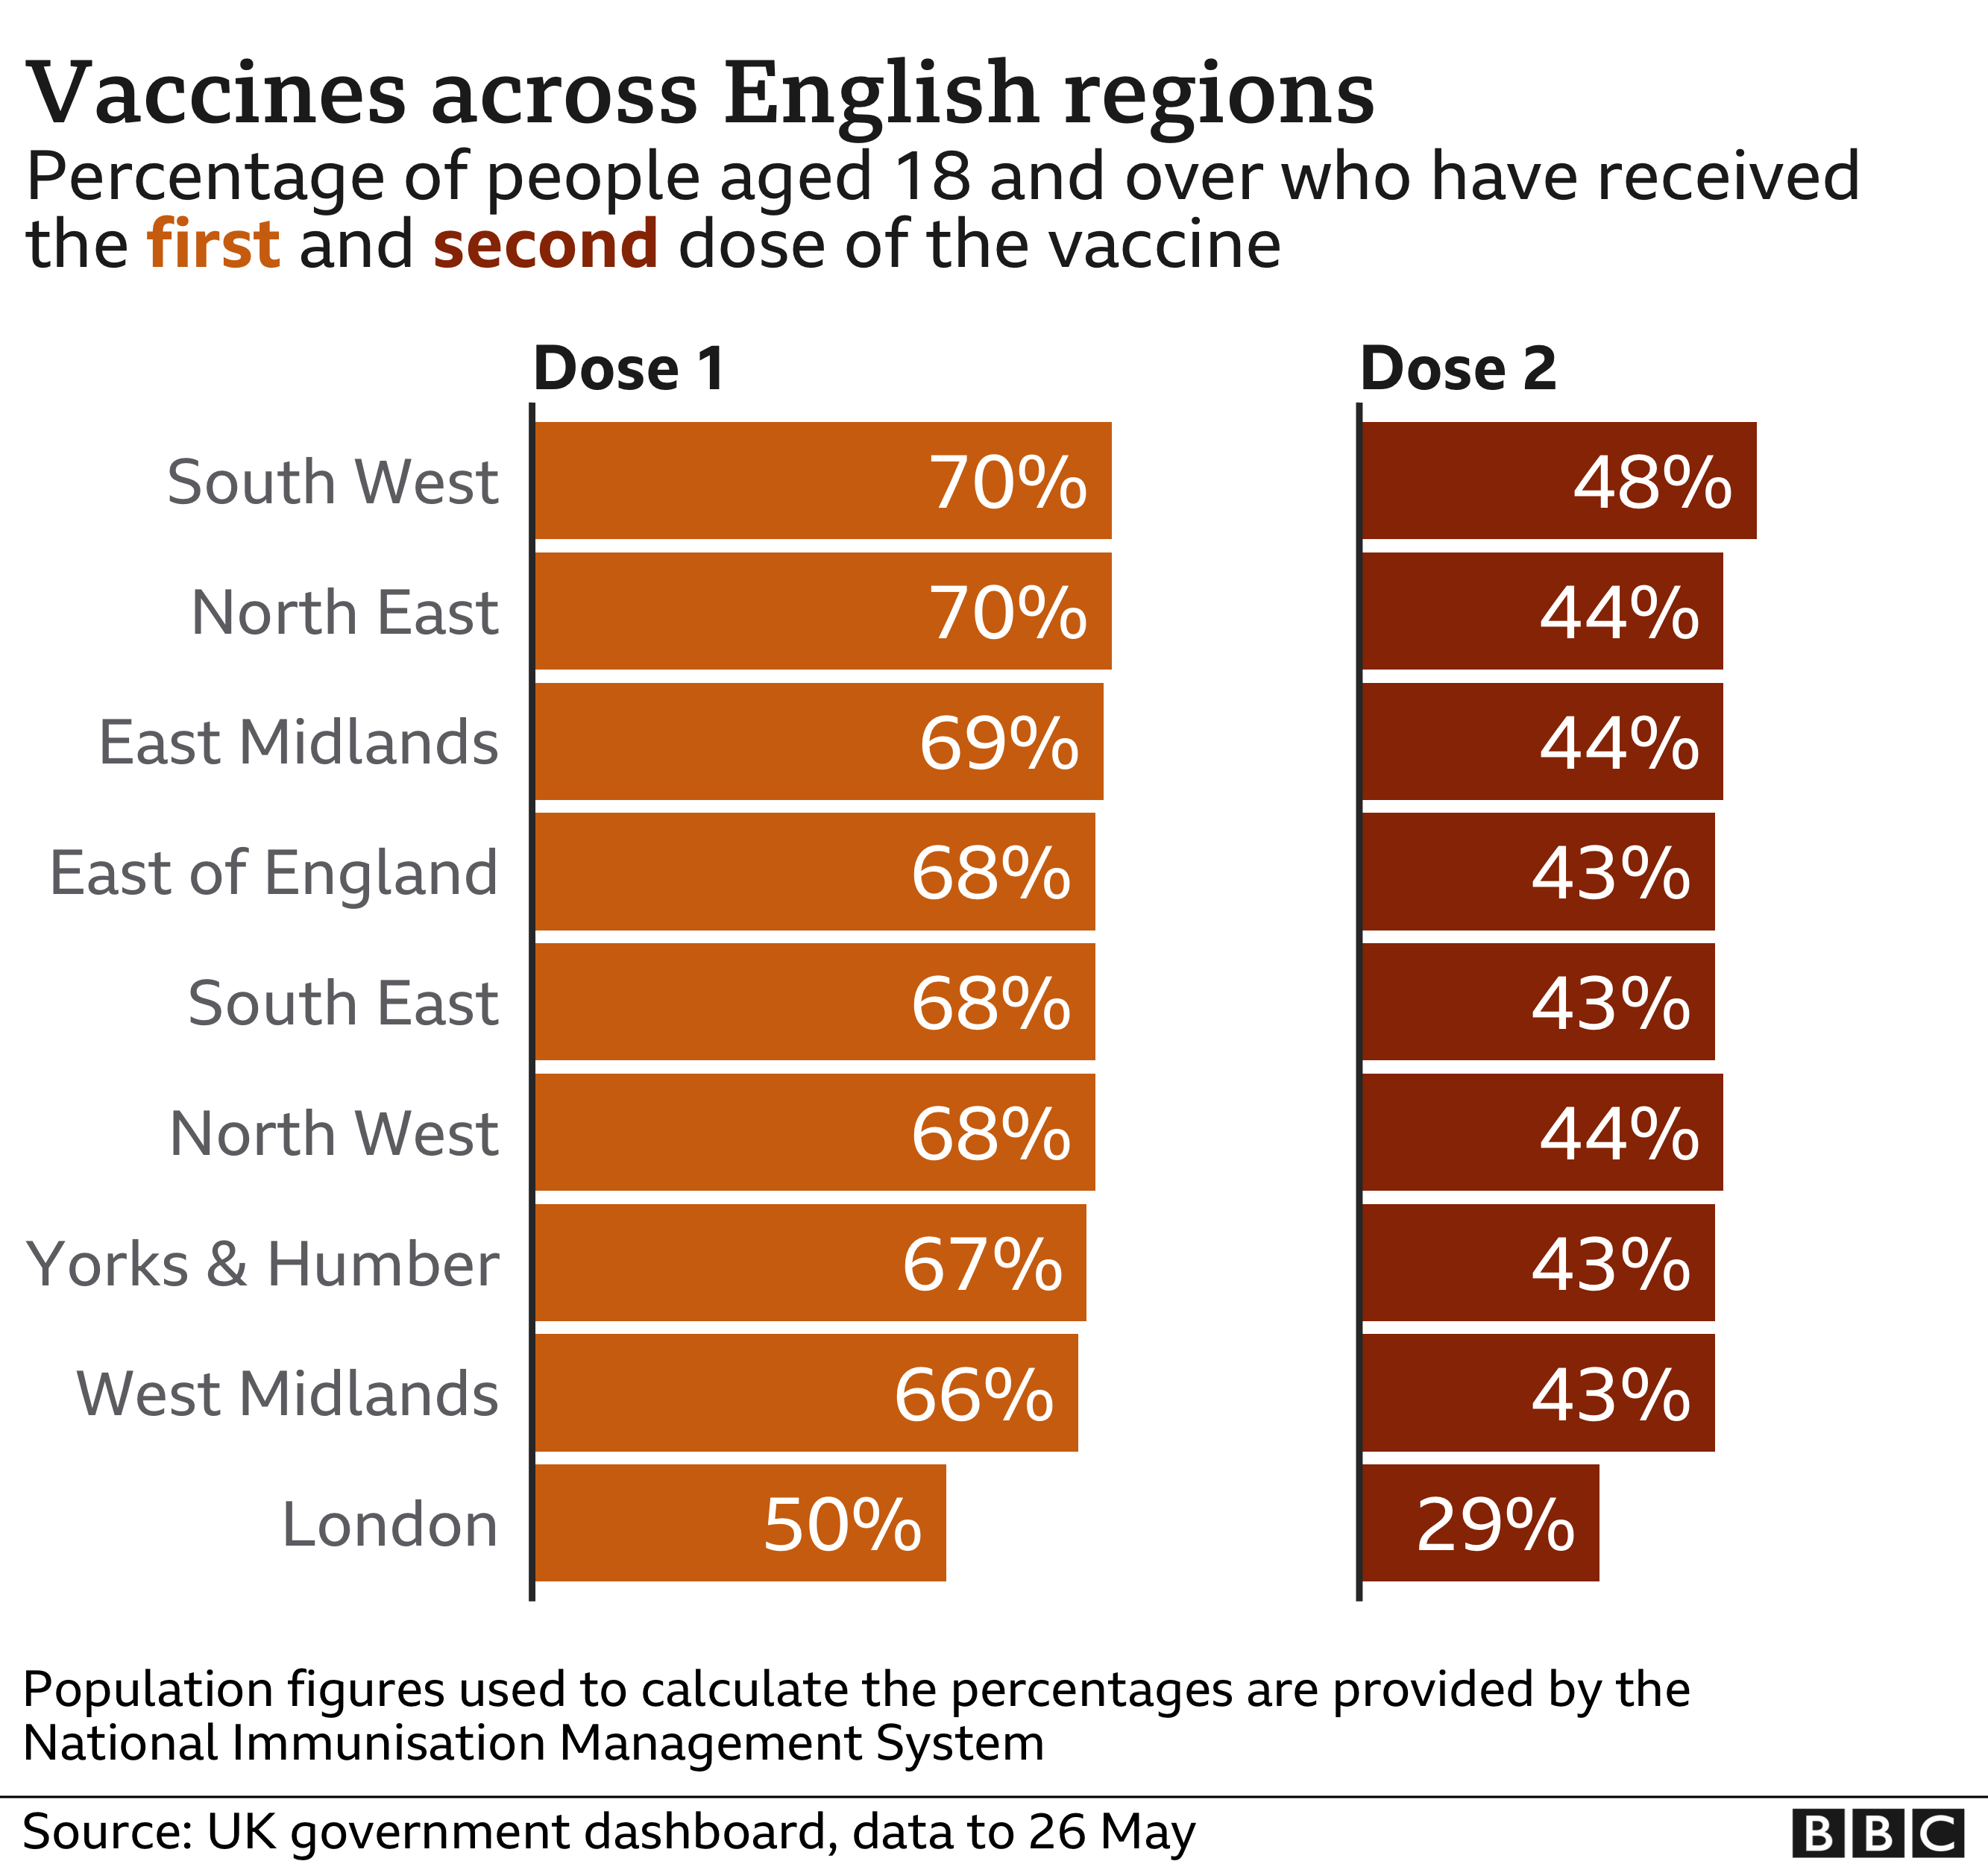 Chart of vaccine take up by English region - 70% of those aged 18 or over in the South West have received one dose of the vaccine, compared with 50% in London